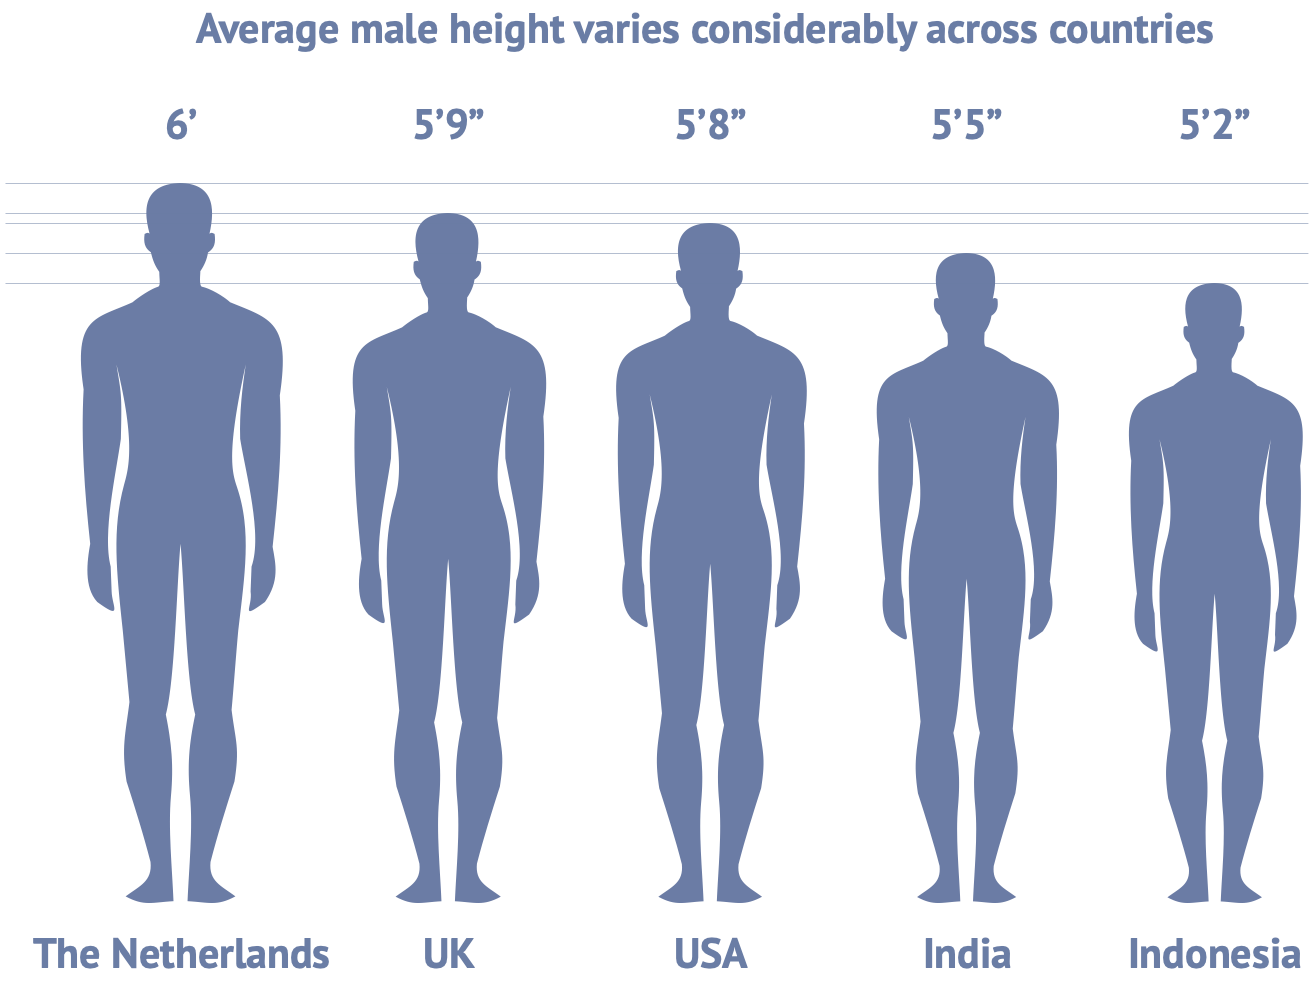 https://decisionmechanics.com/wp-content/uploads/2023/02/averarge-male-height-chart-improved.png